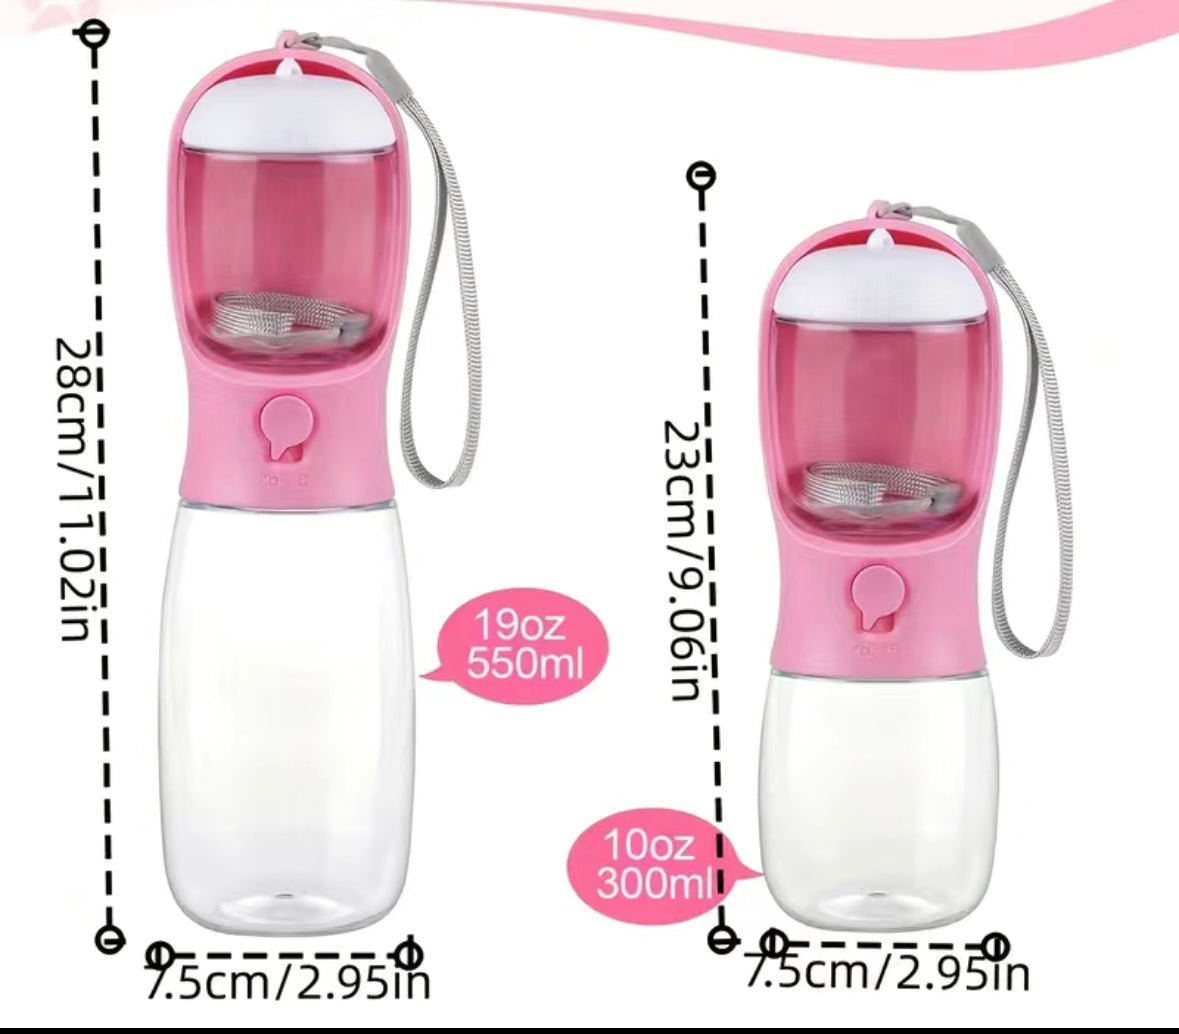 Pet Water Bottle with Food Container - 4 Legs R Us